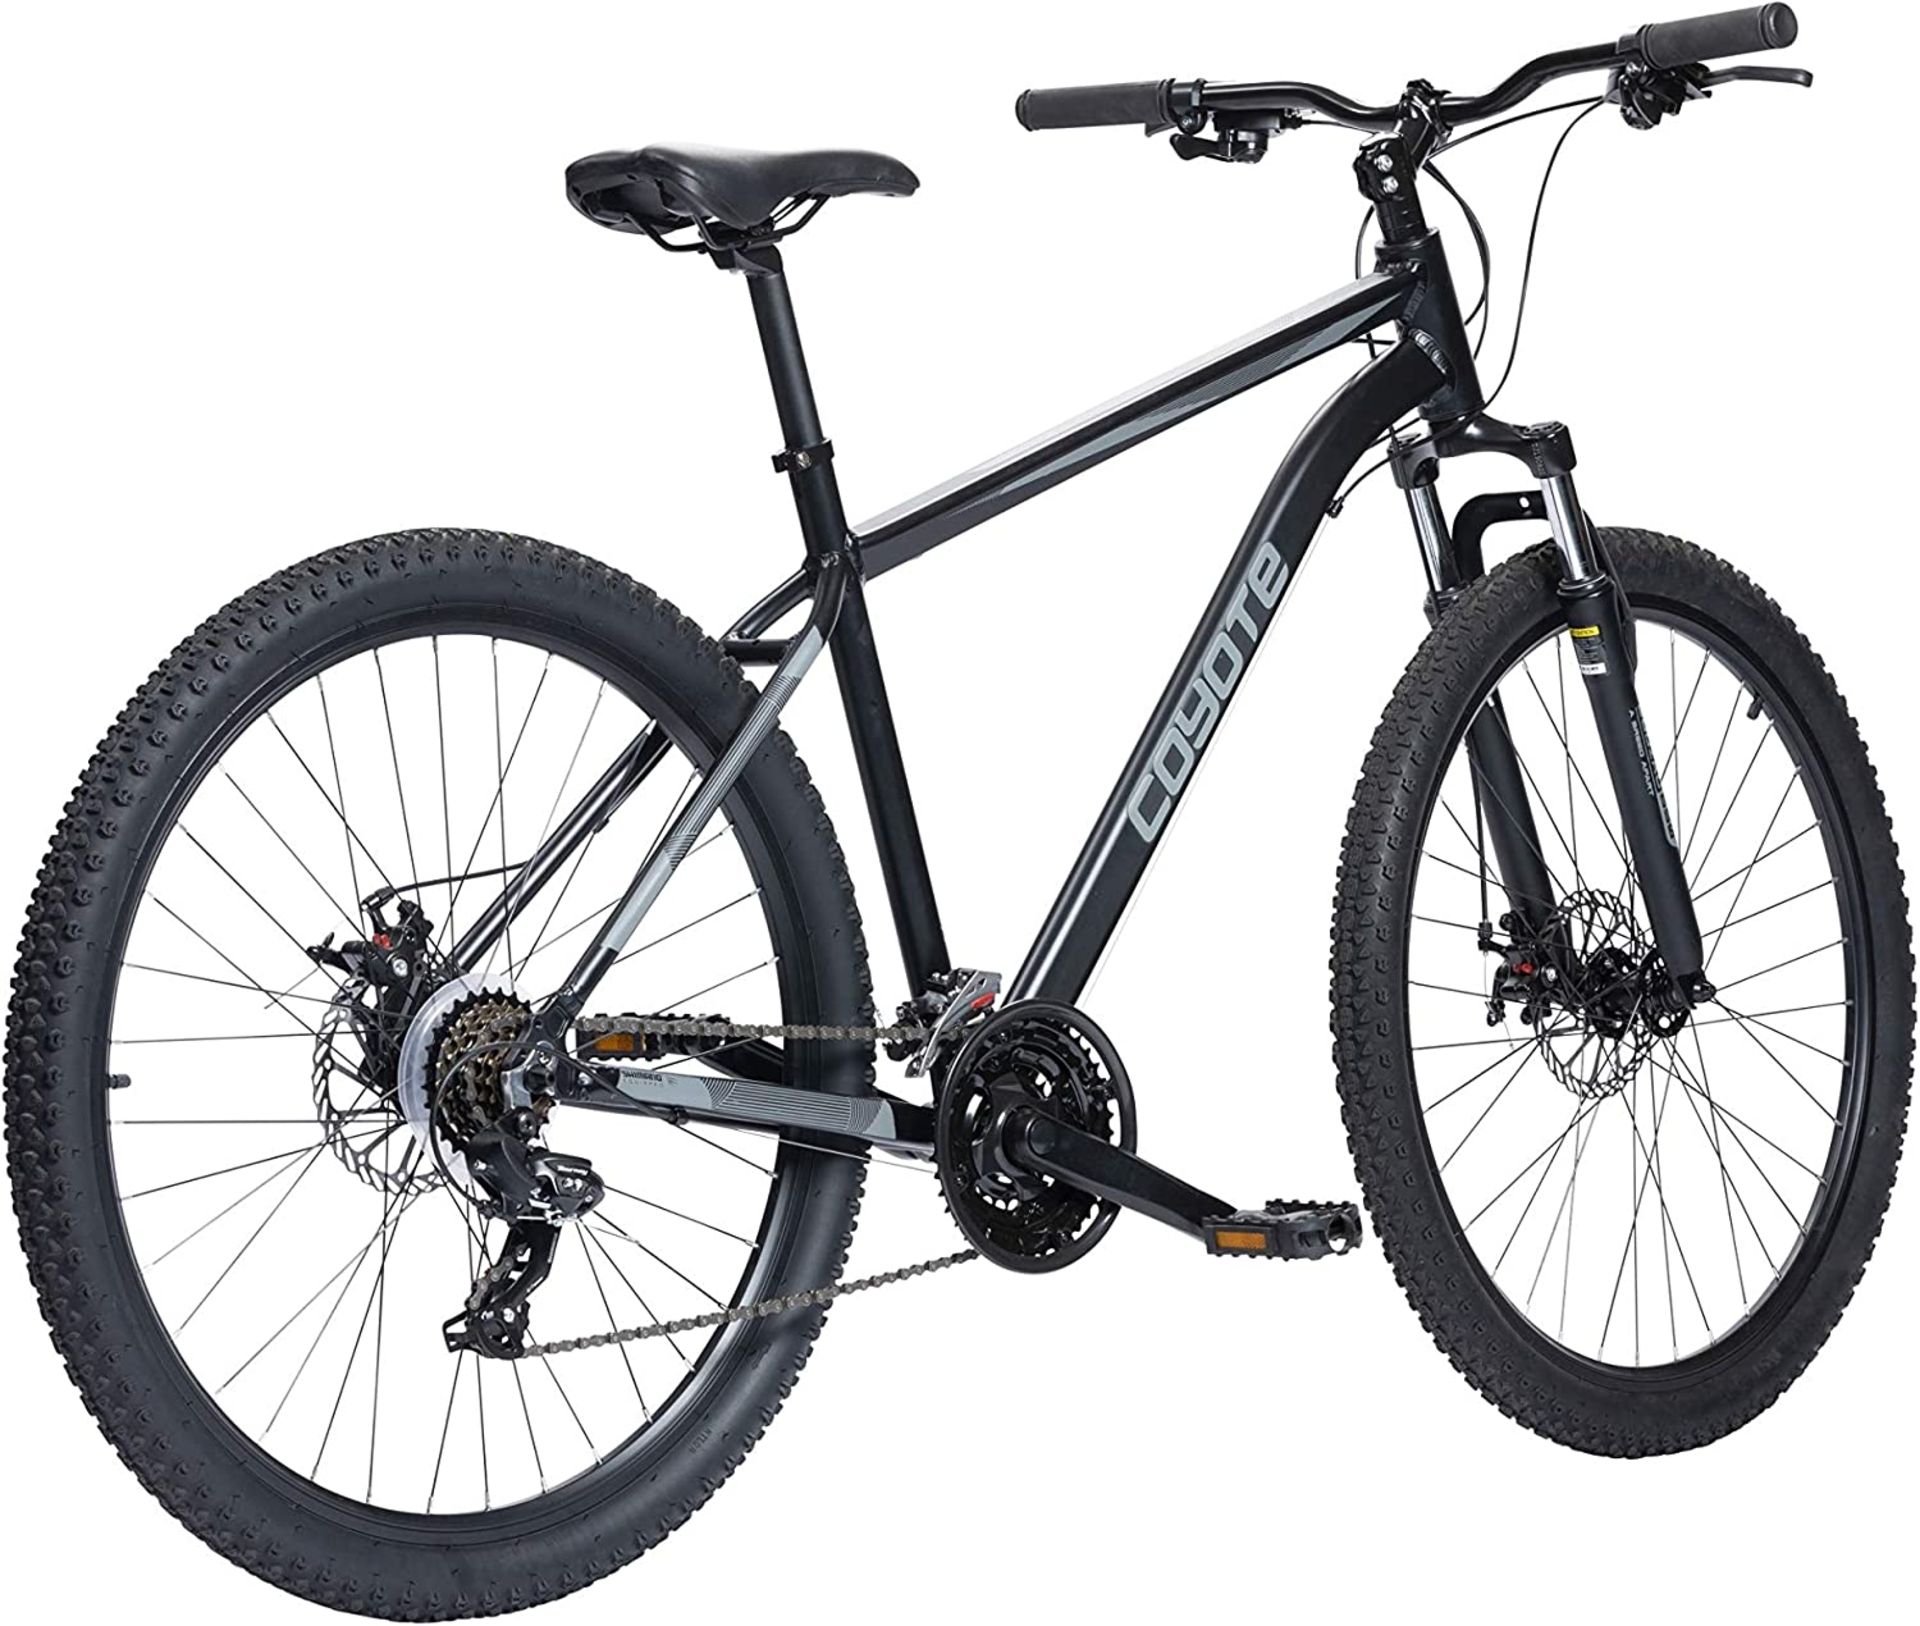 Coyote Origin 22" 700c 18Spd. RRP £375.00. Equipped with 18 speed Shimano gearing to minimise the - Image 2 of 3